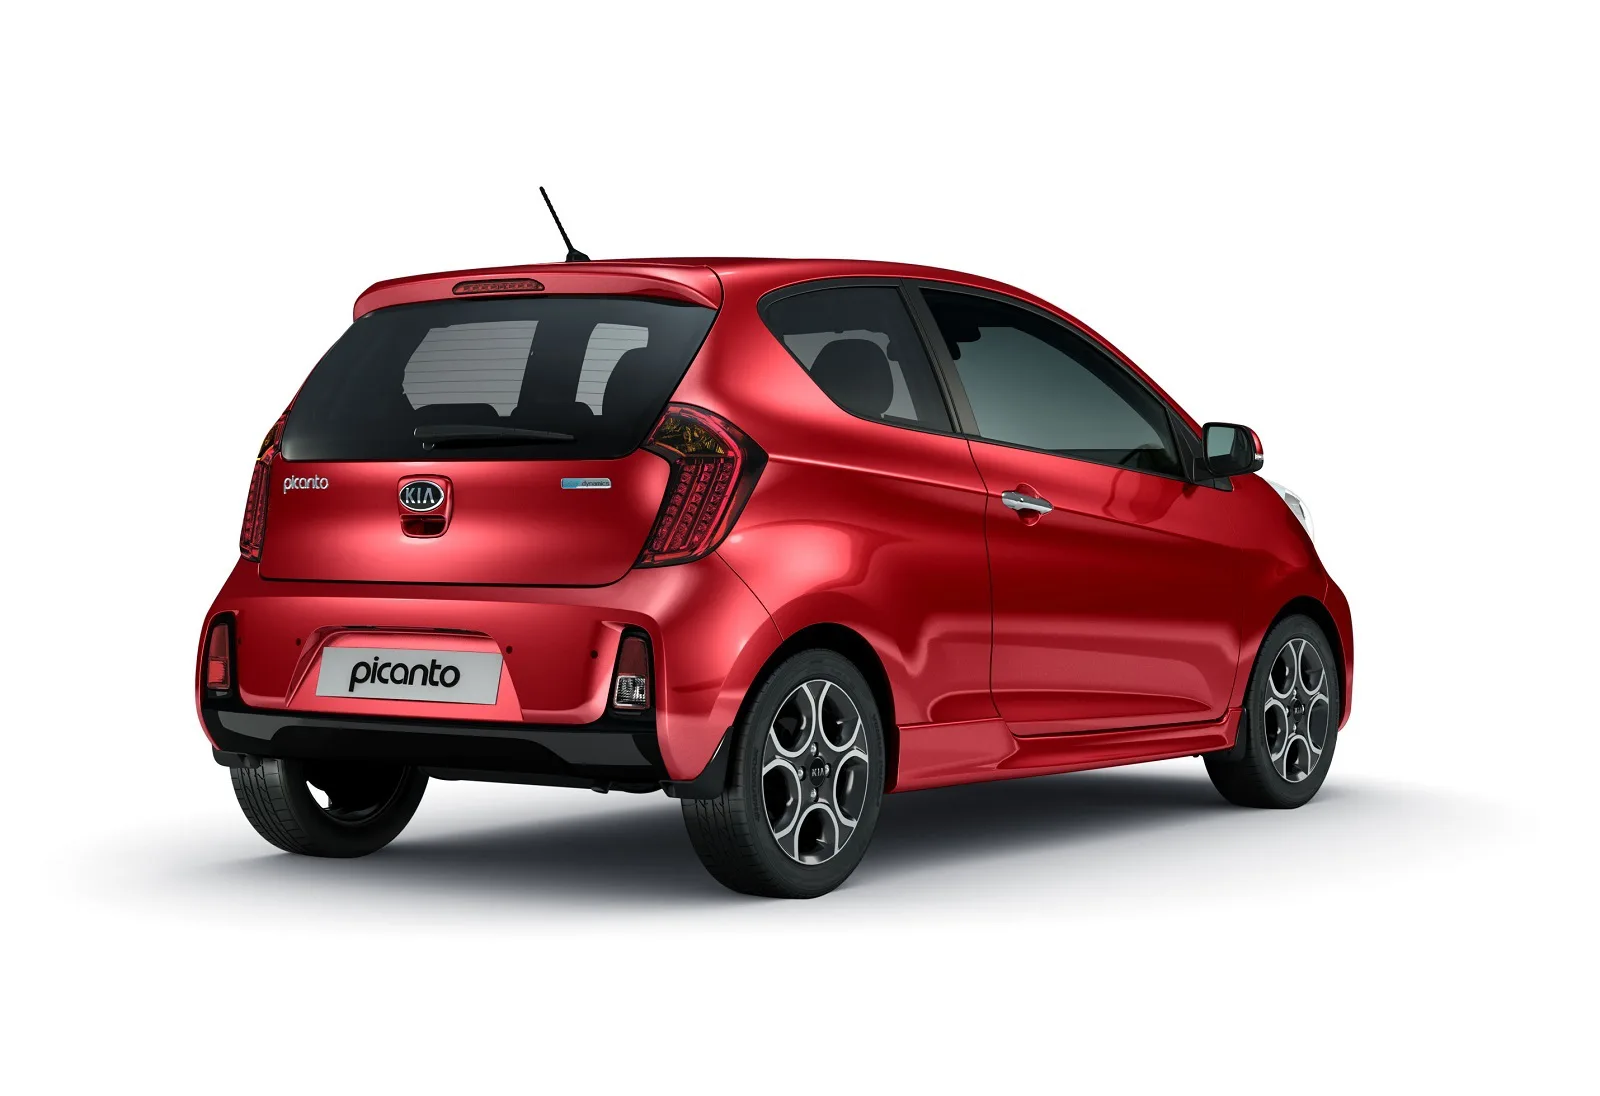 Picanto Facelift to Debut in Turbo for Europe - Korean Car Blog